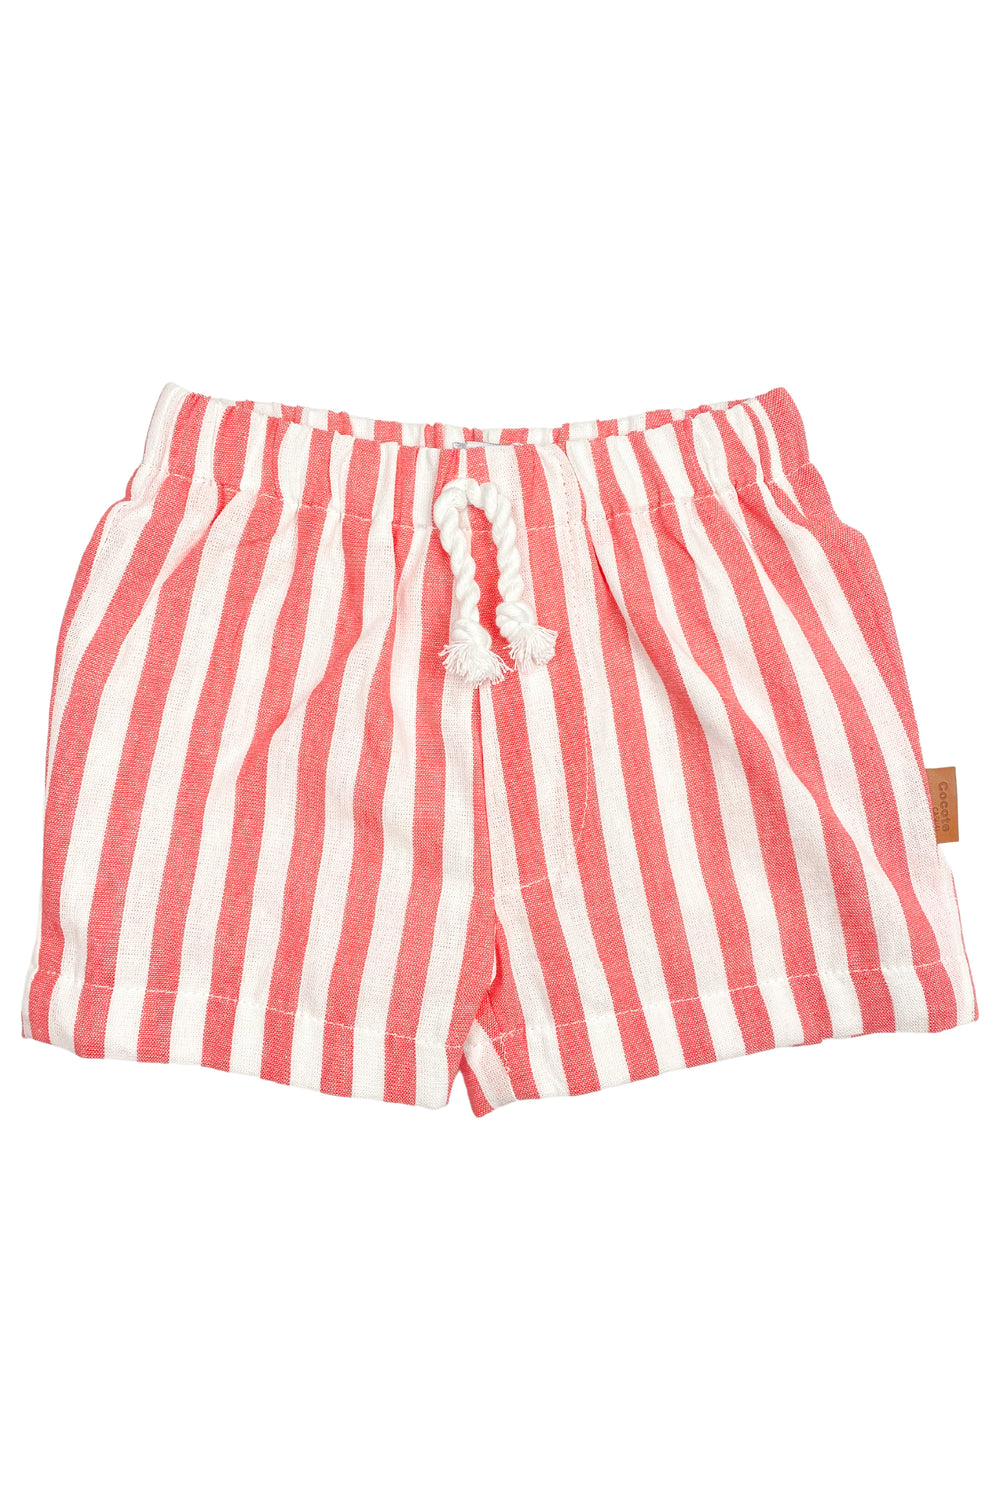 Cocote "Lawrence" Striped Shorts | iphoneandroidapplications